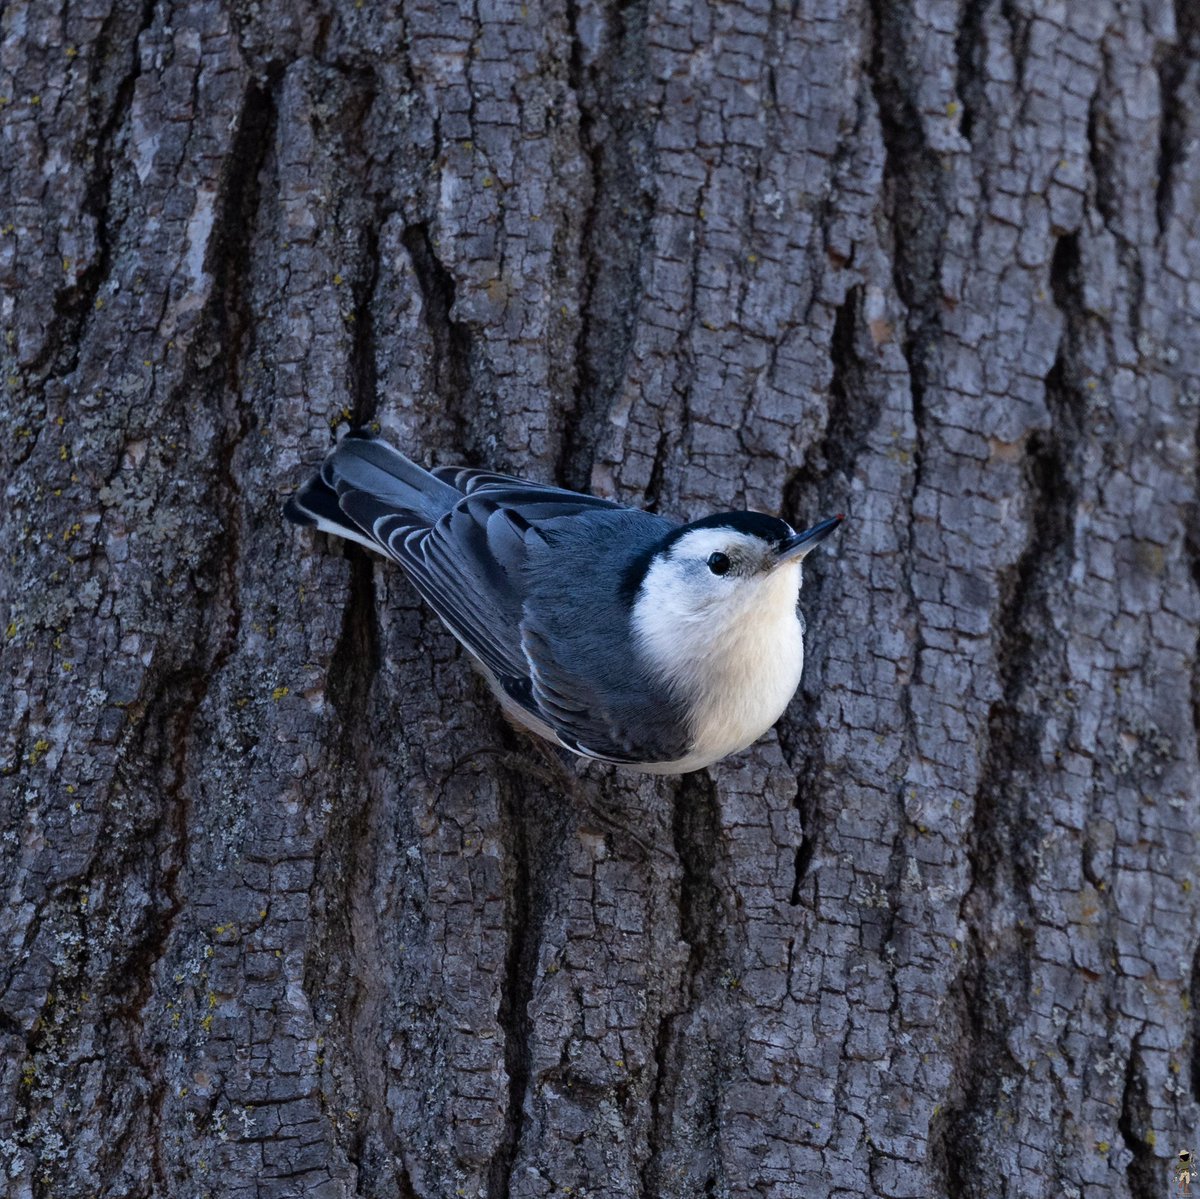 White-breasted Nuthatch (Male) with a very recognizable posture, perching up-side down on the tree trunk.

#birds #nuthatch #nature #wildlife #bird #photography #whitebreastednuthatch #birding #California